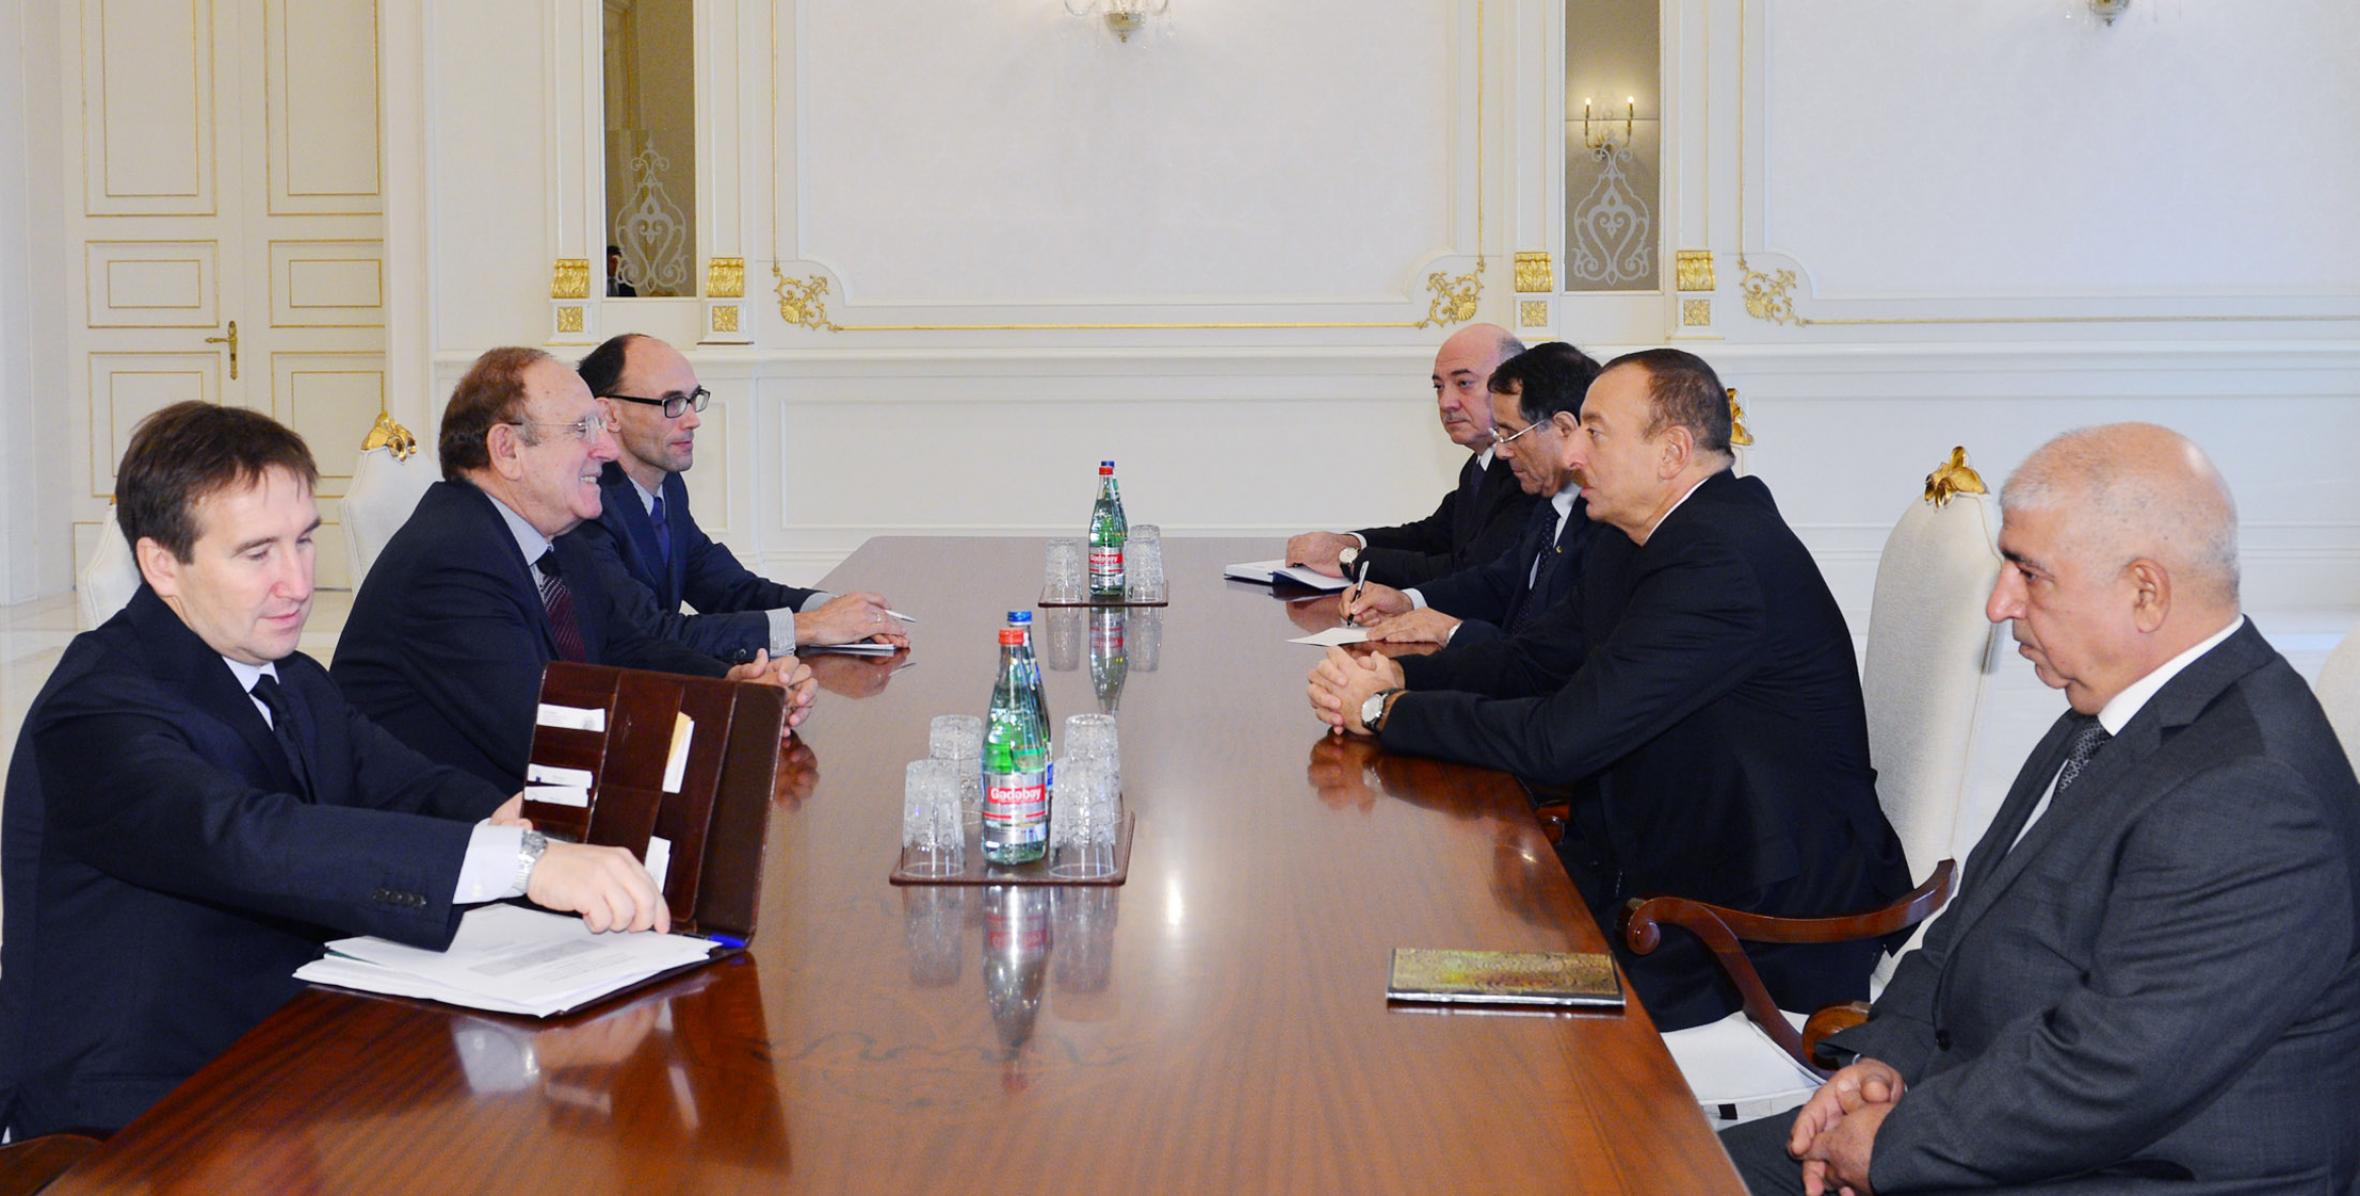 Ilham Aliyev received a delegation of the European Parliament led by the head of the observation mission for the presidential elections in Azerbaijan